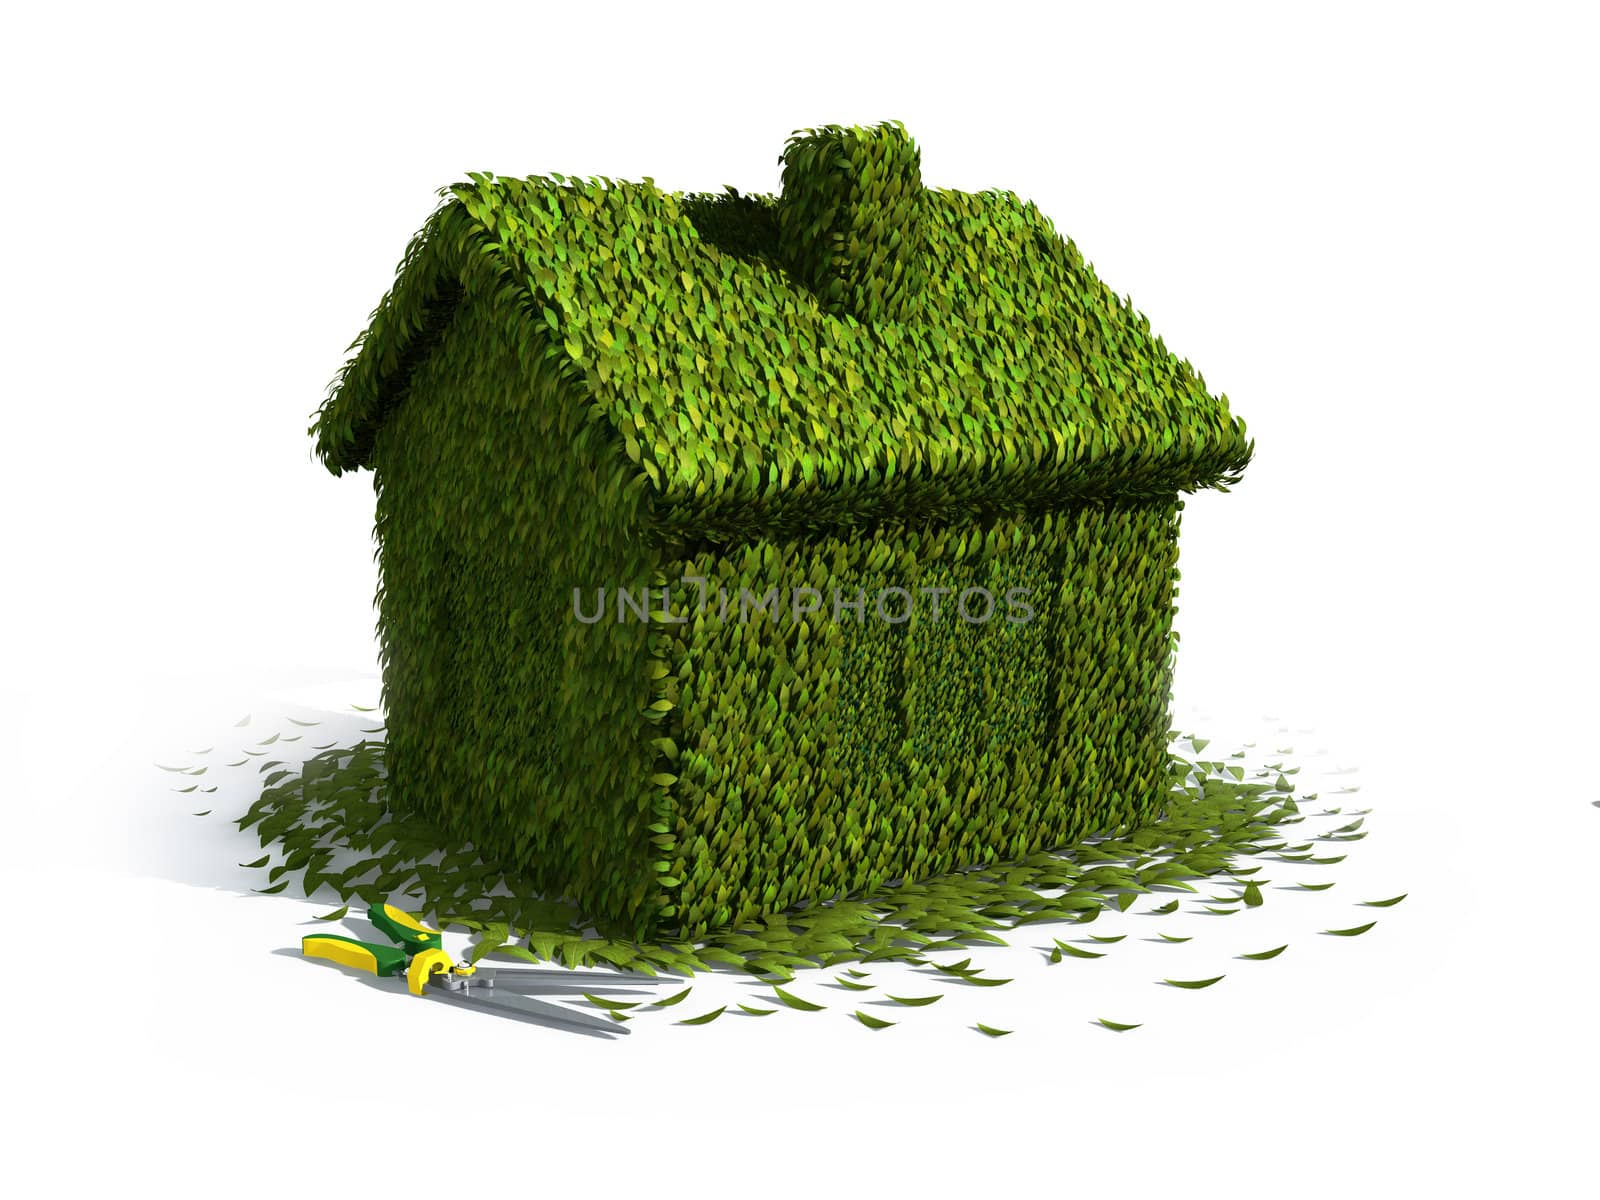 concept ecology house from grass with scissors by denisgo